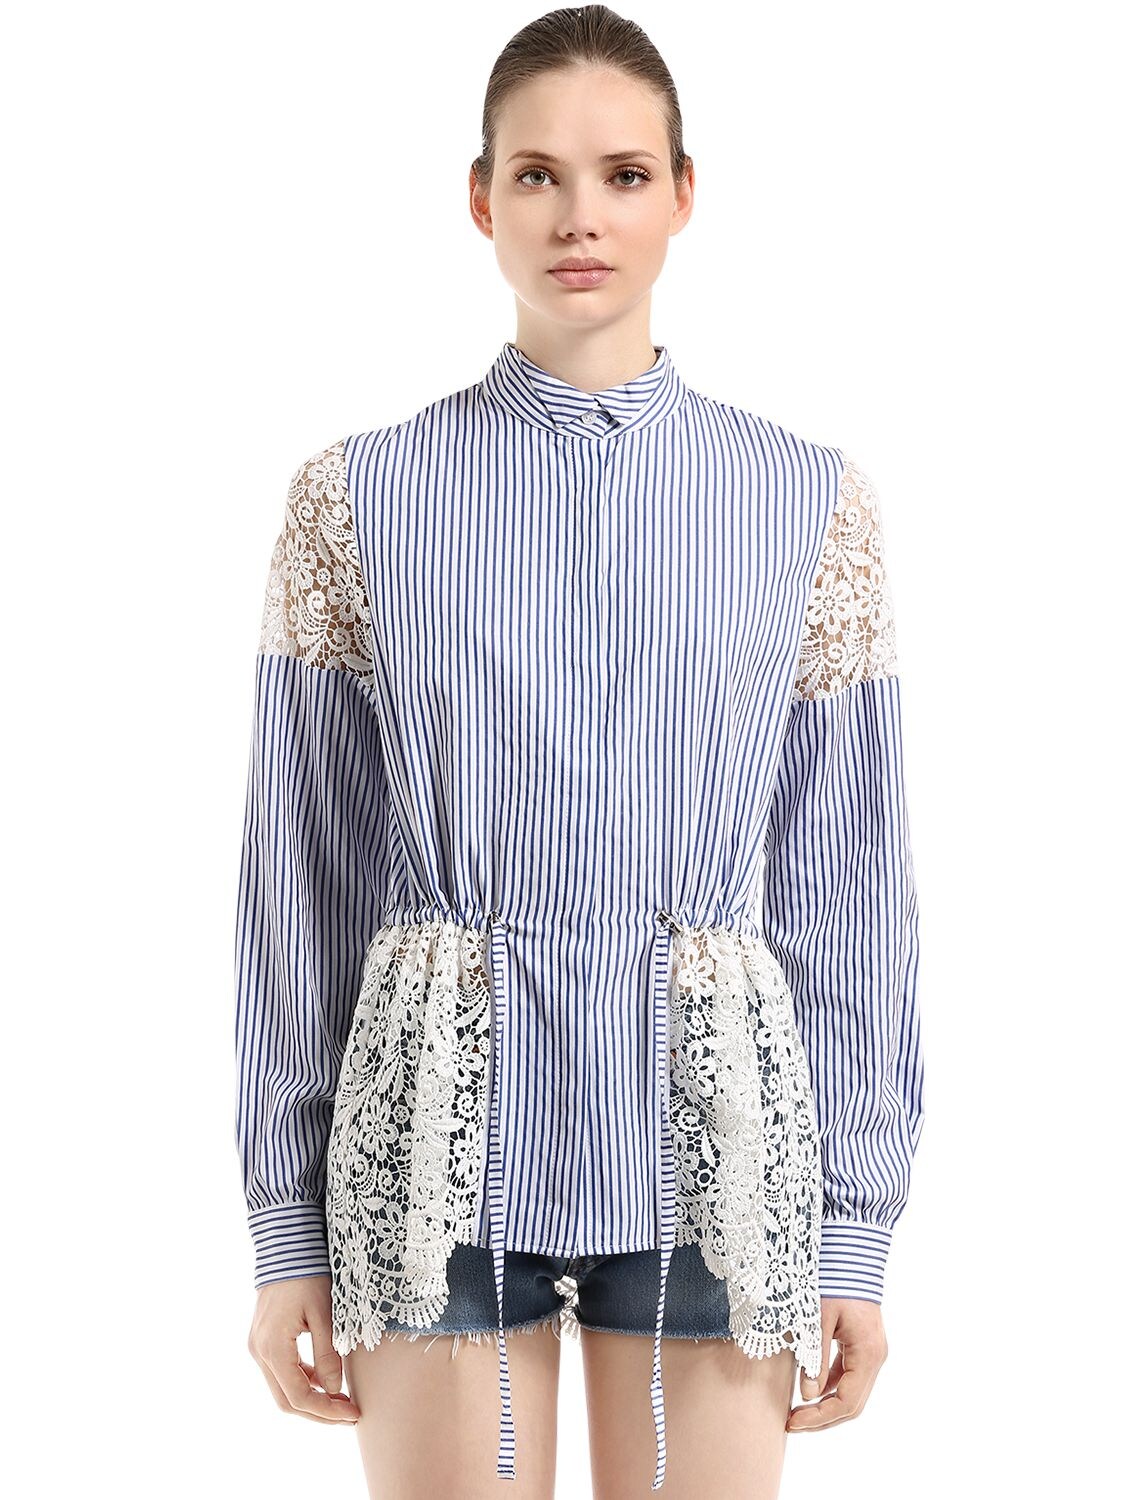 T.a.g.g. Striped Cotton & Lace Shirt In Blue